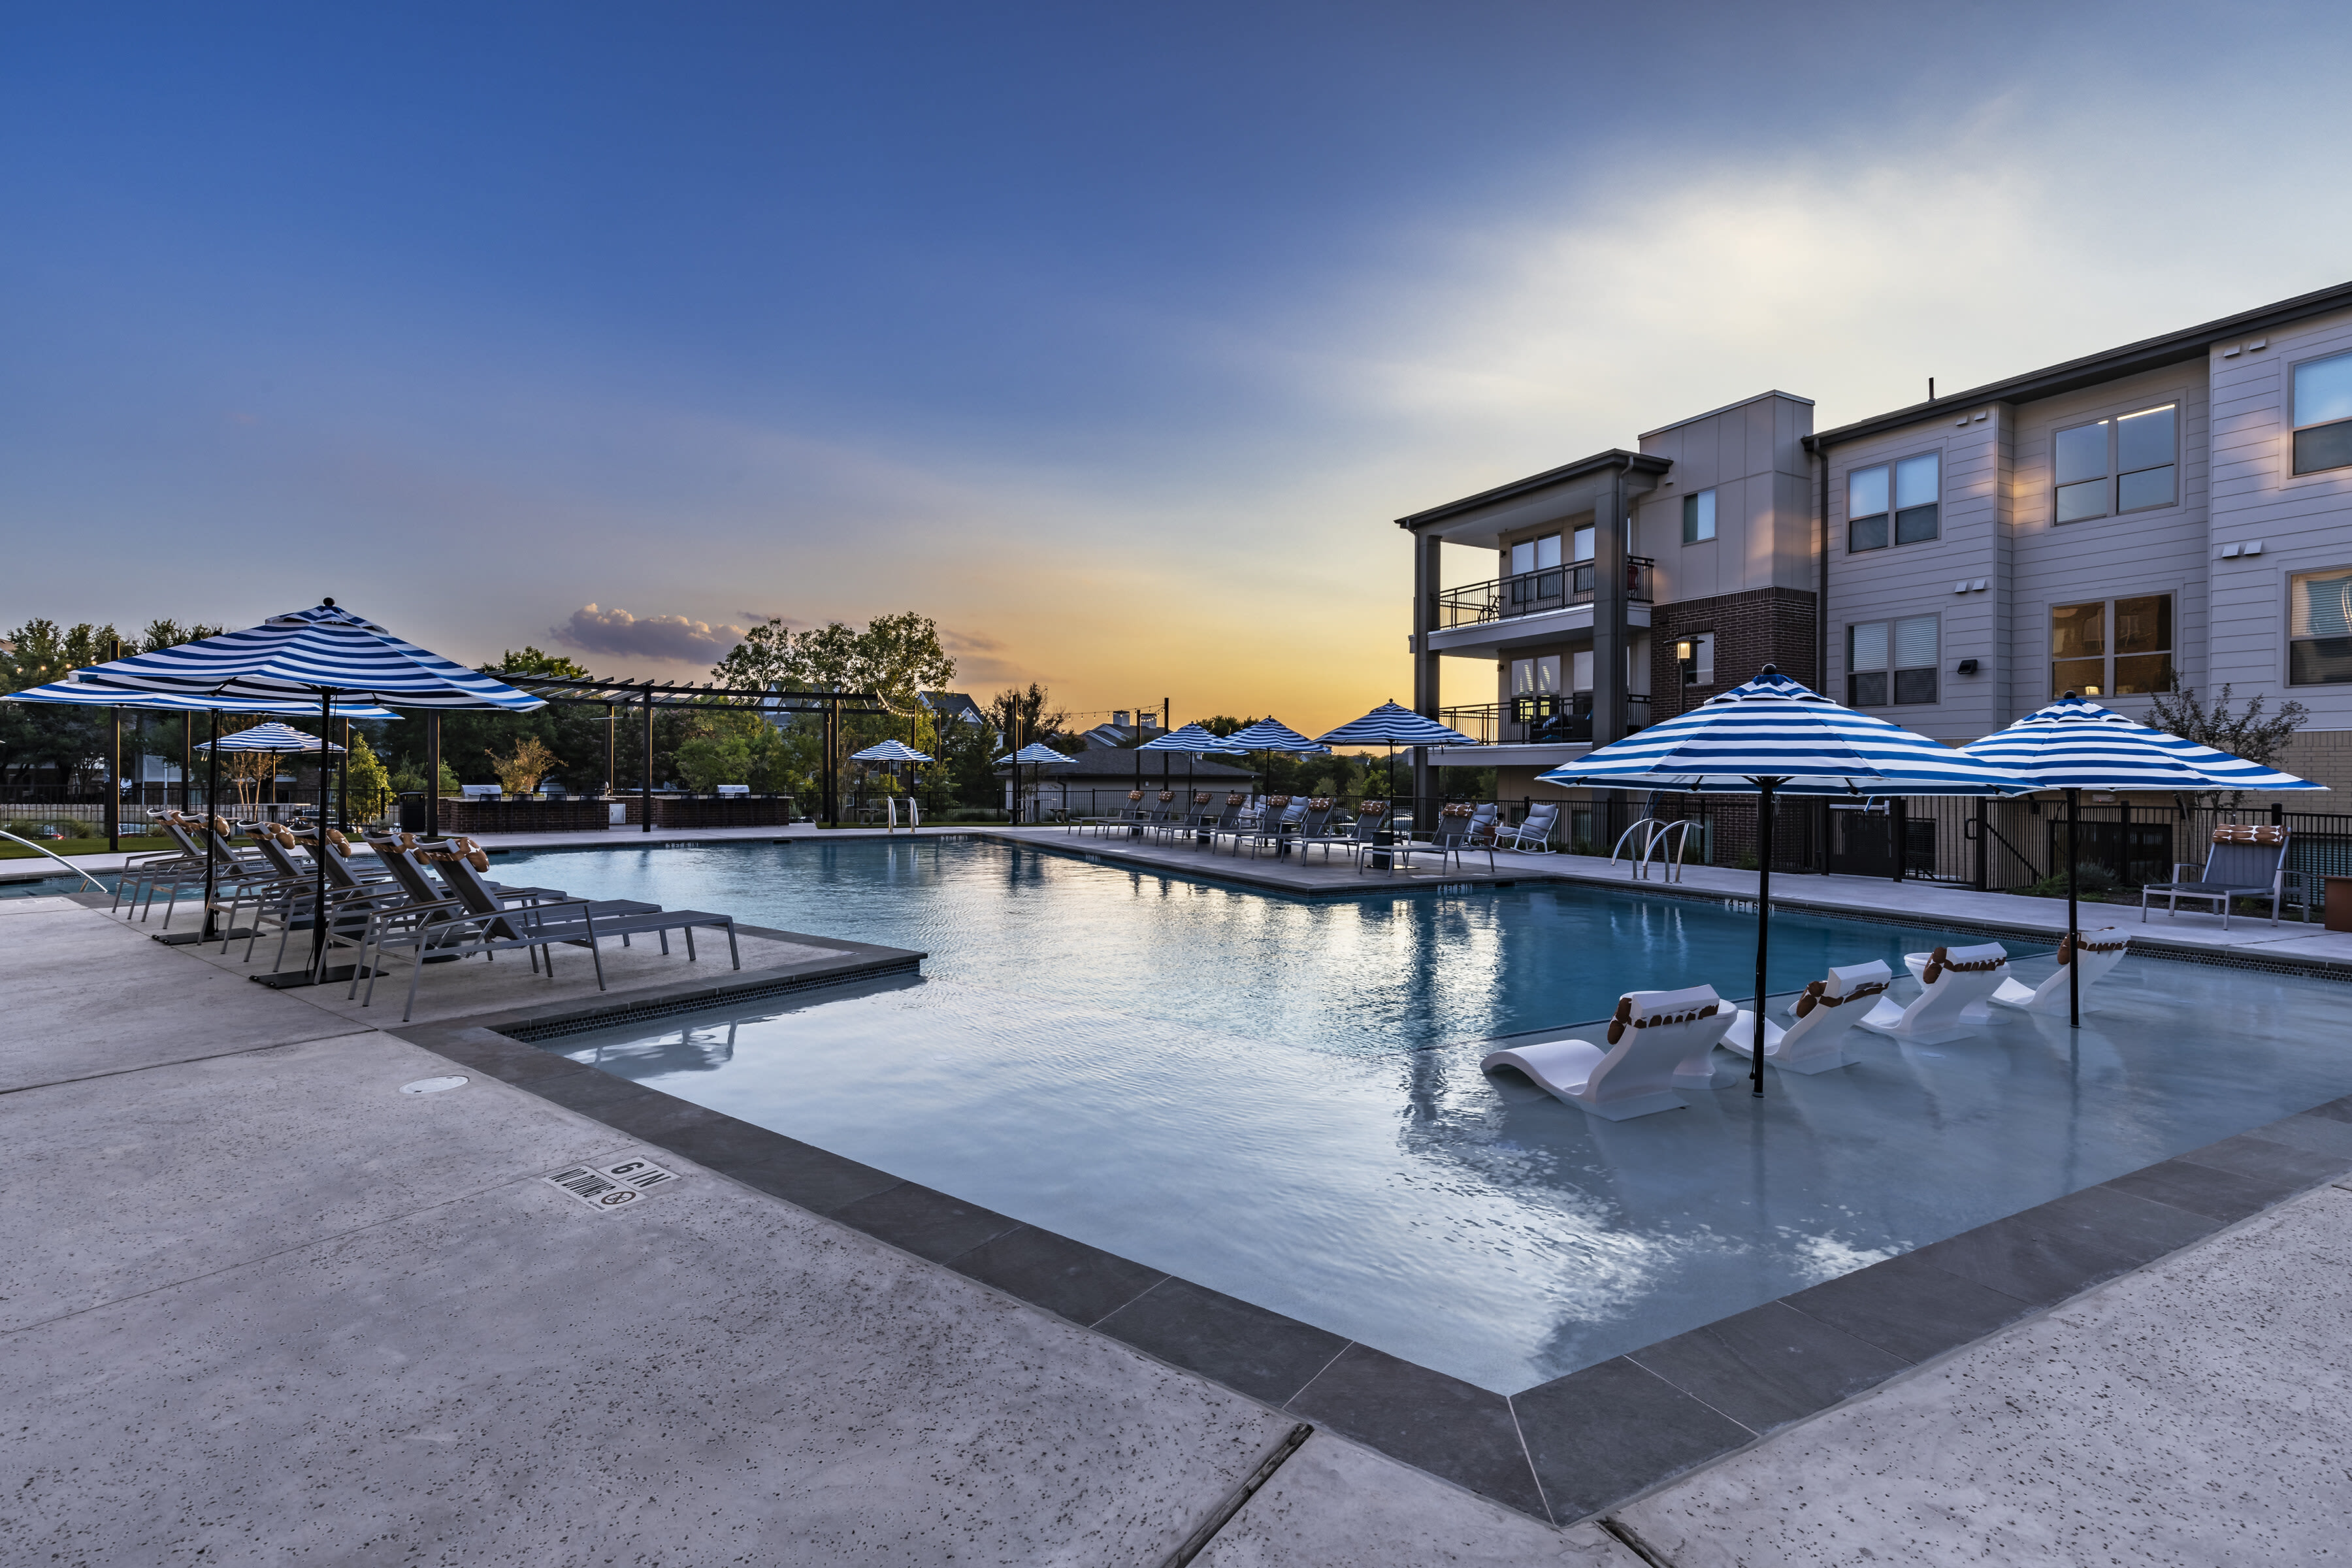 Beautiful resort-style pool at The Warner in Round Rock, Texas